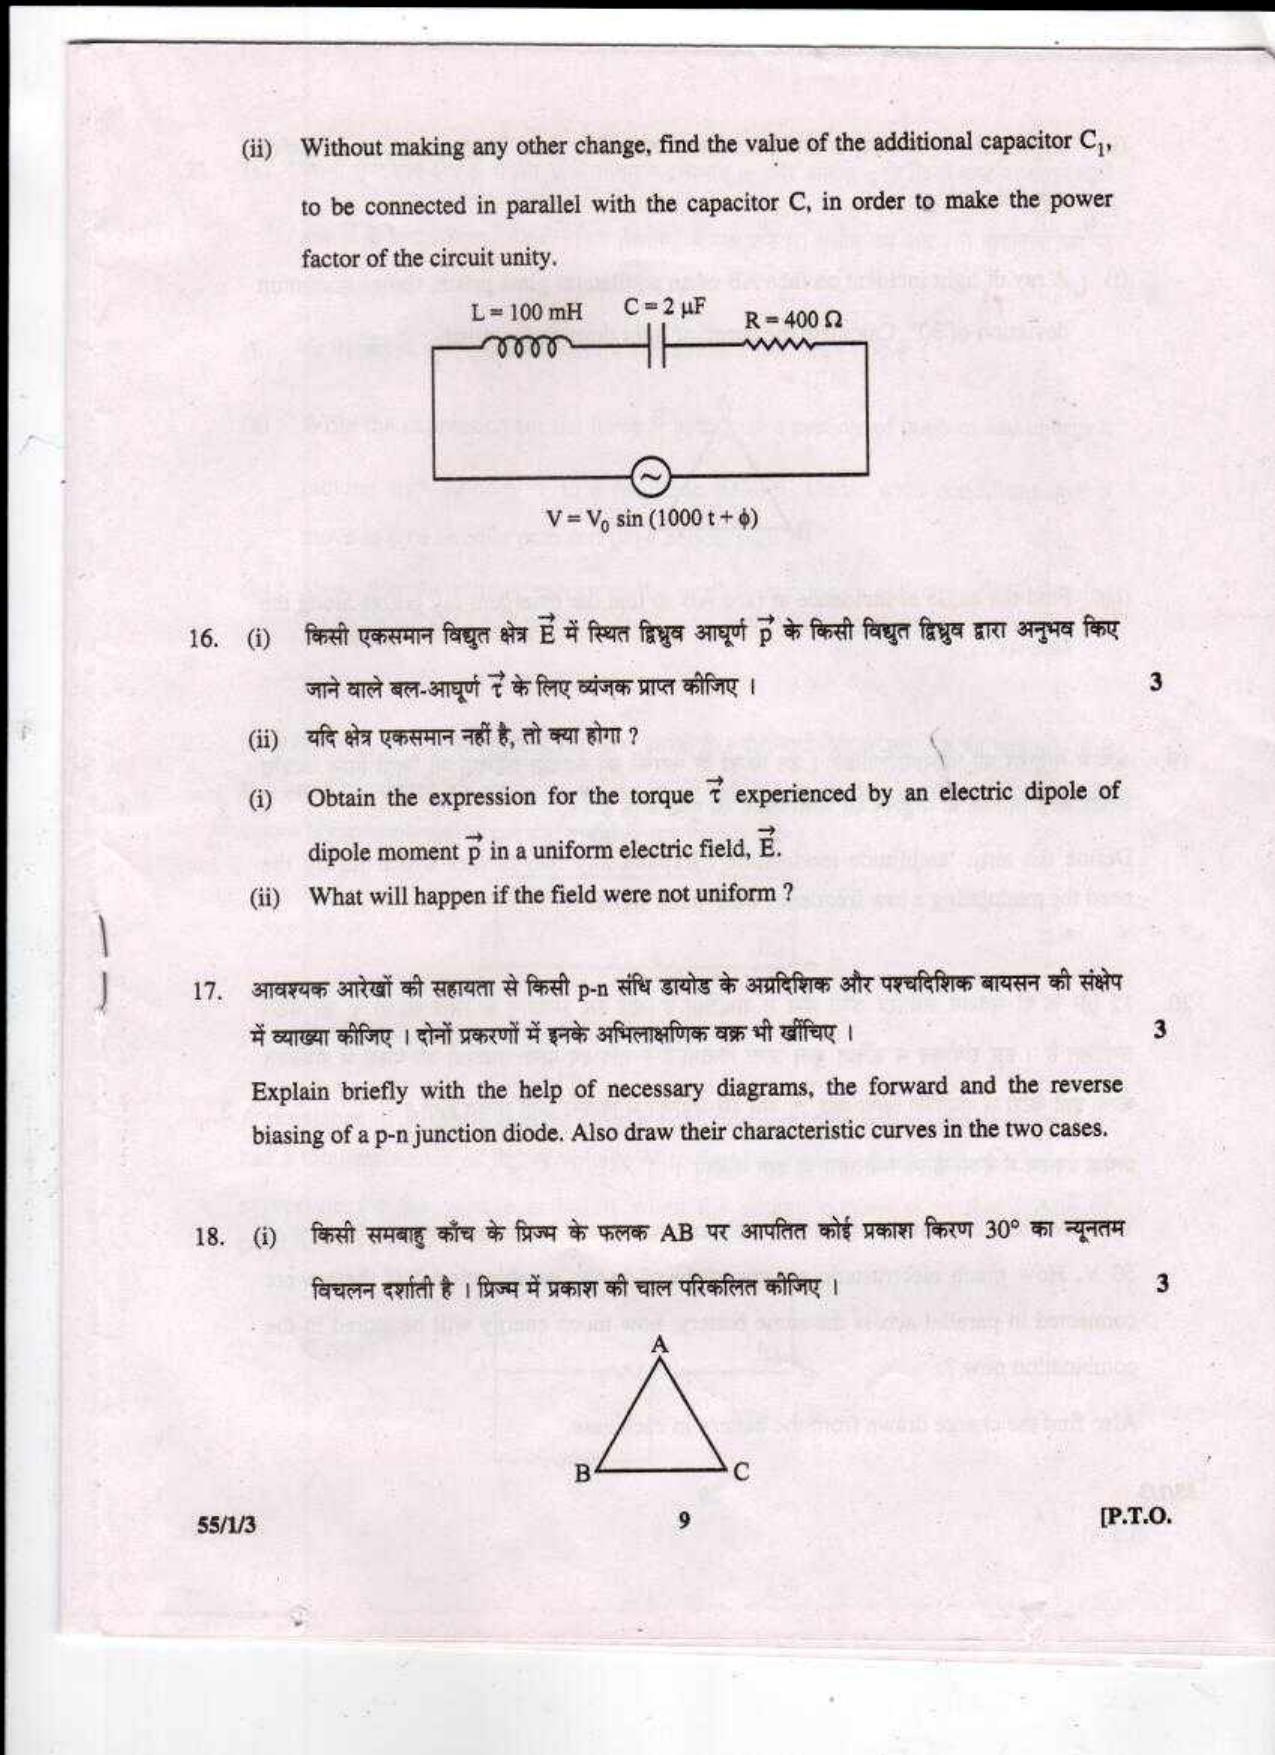 CBSE Class 12 Physics (Theory) SET 3-Delhi-12 2017 Question Paper - Page 9